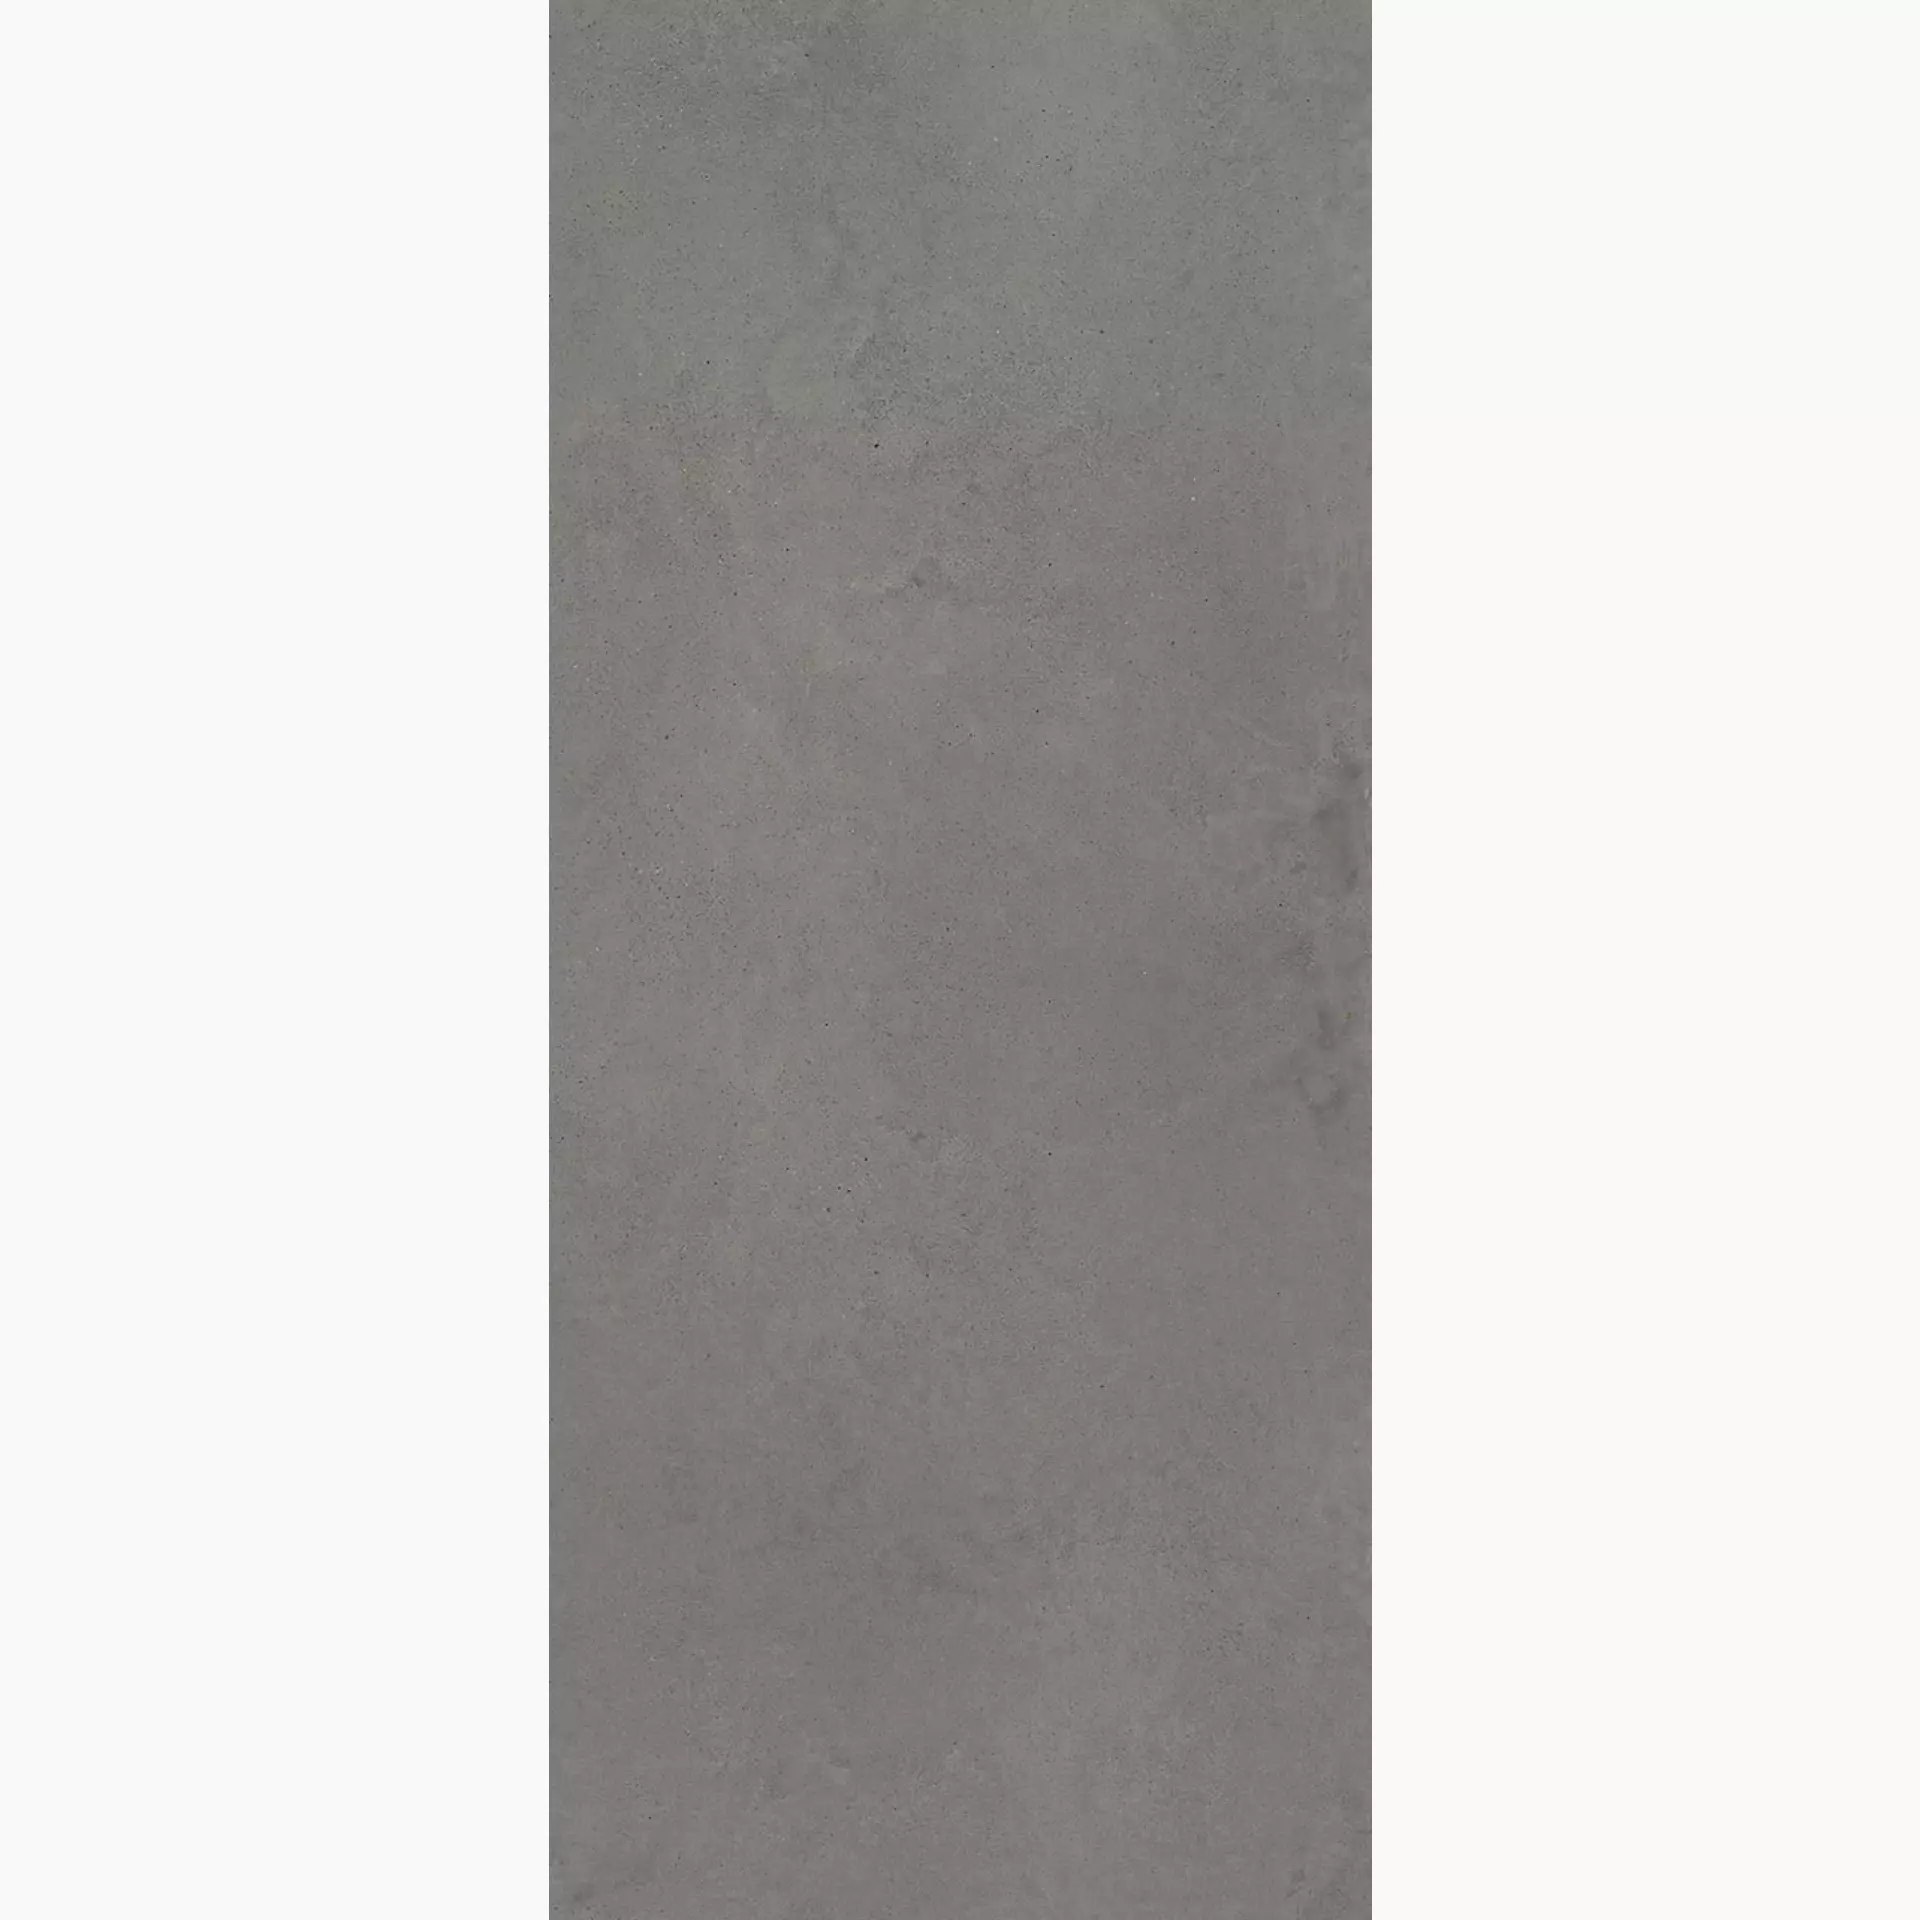 Coem Wide Gres Graphite Naturale Cement Effect 0CE127R 120x120cm rectified 6mm